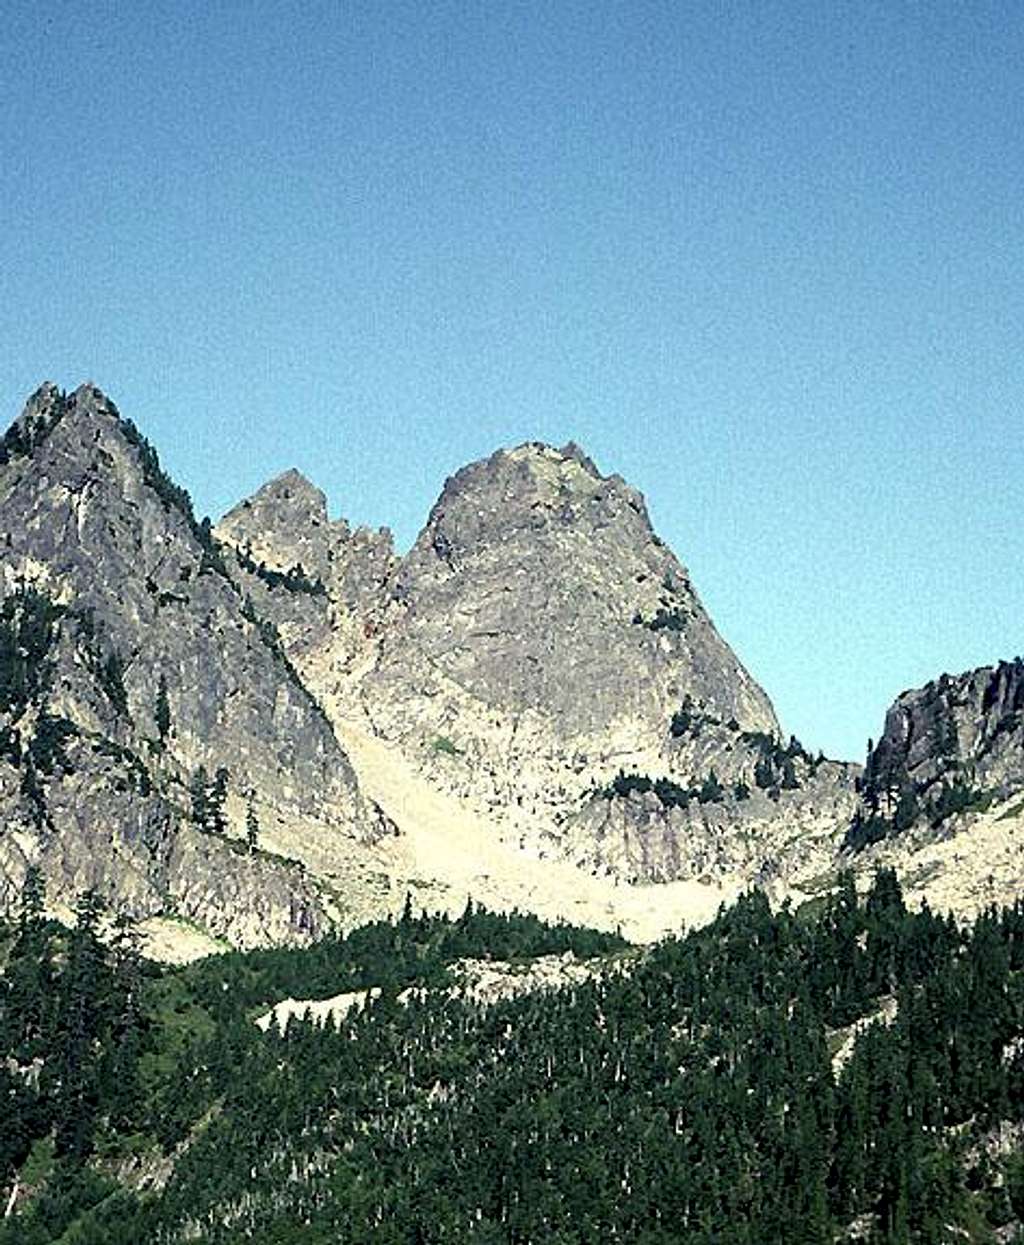 Chair Peak from the east.